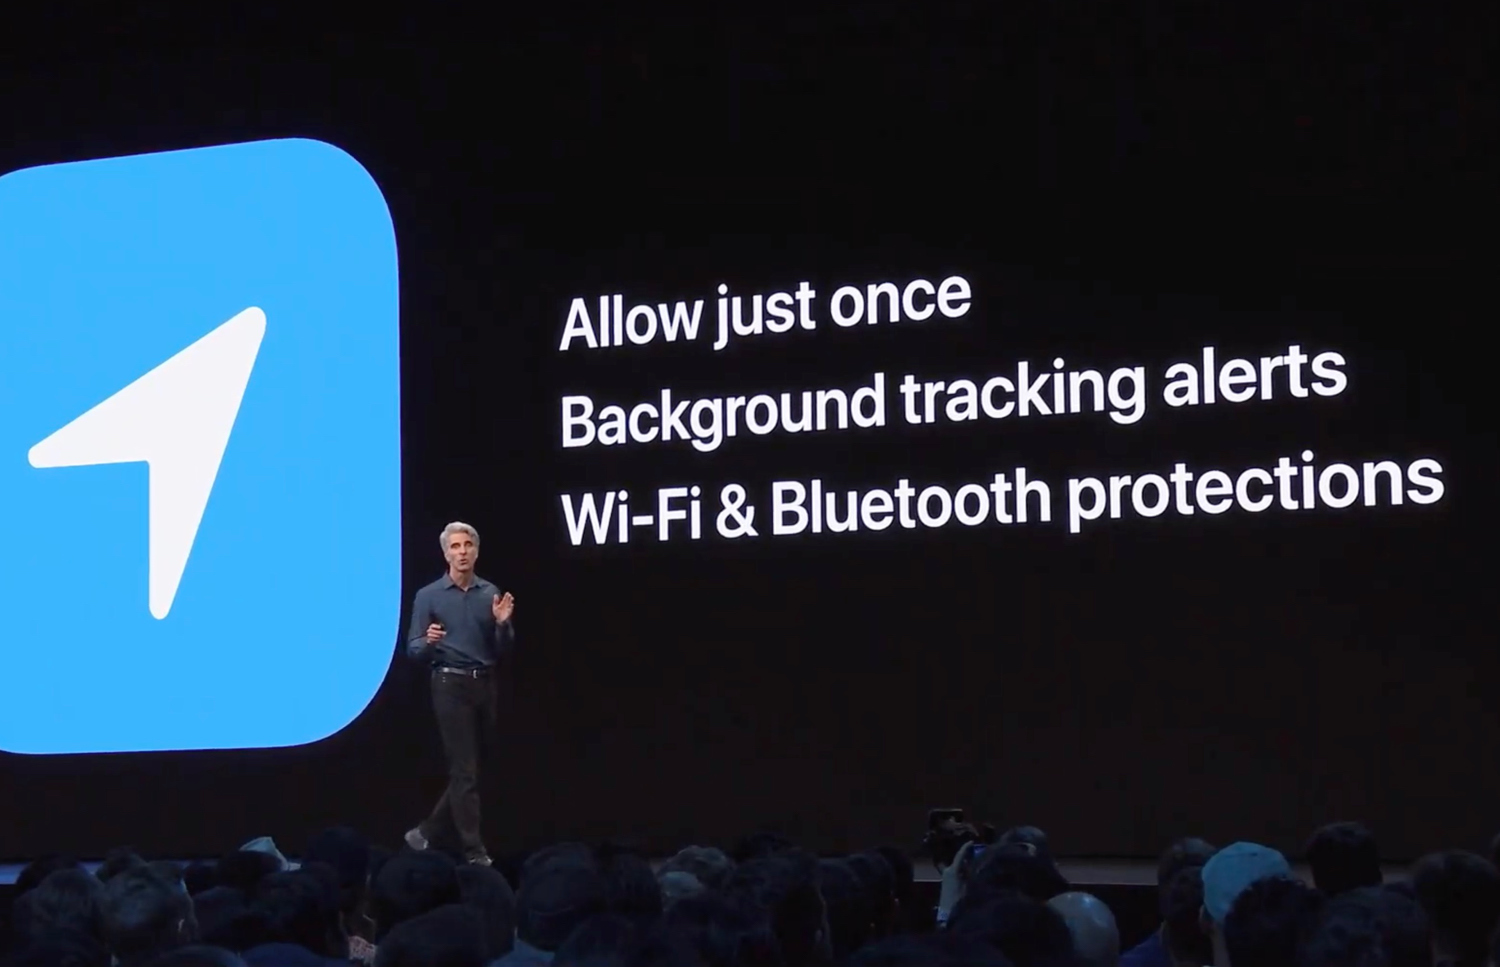 iOS 13 will let you limit app location access to just once